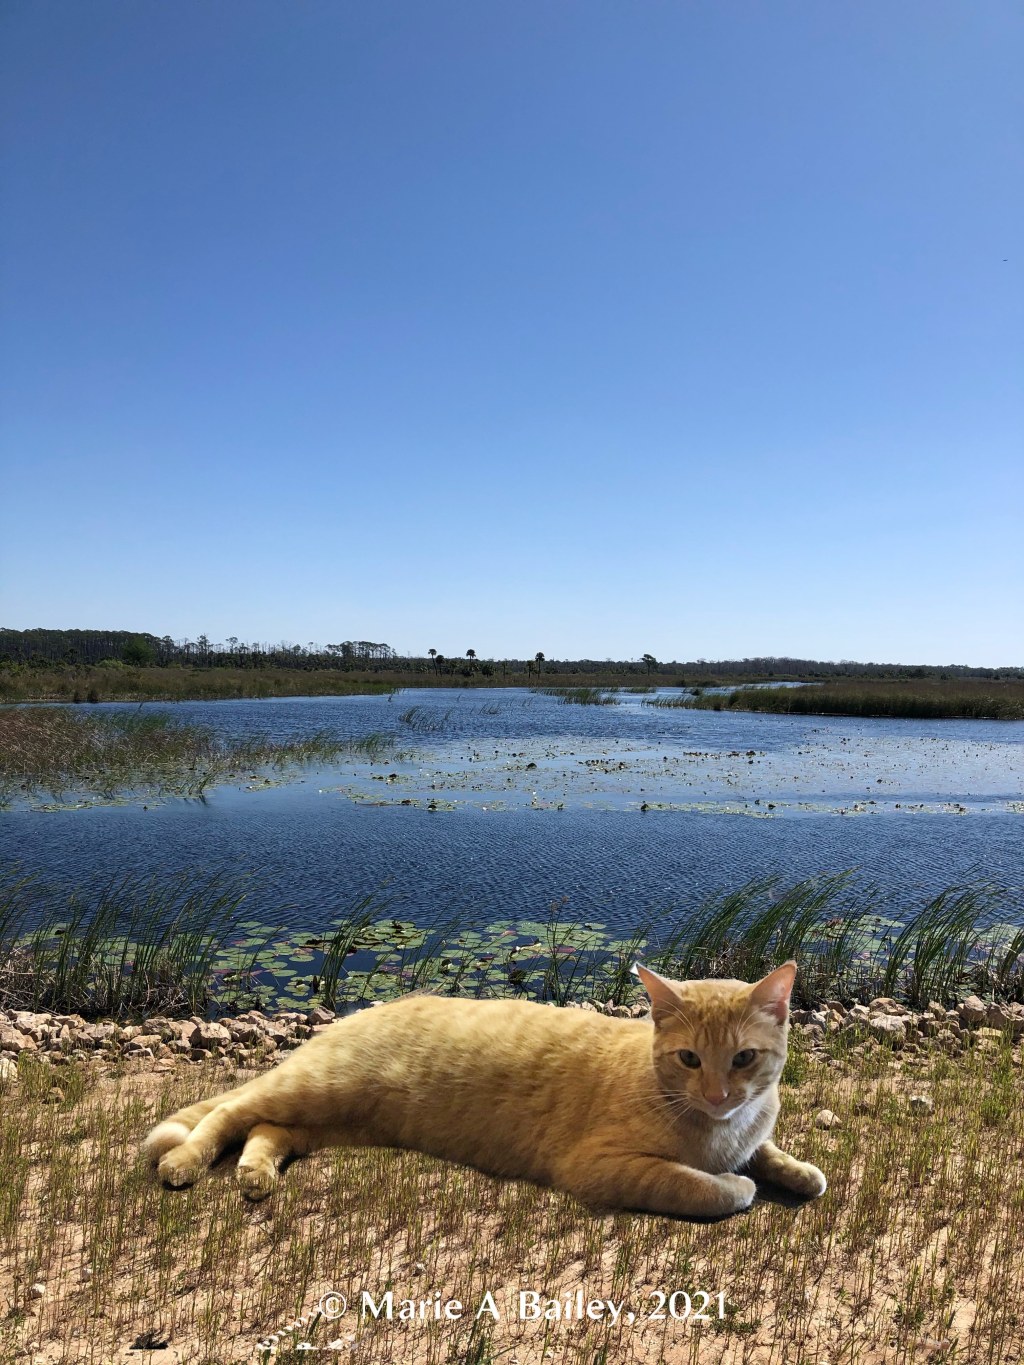 Yellow cat superimposed over a bayou scene and a rocky trail.